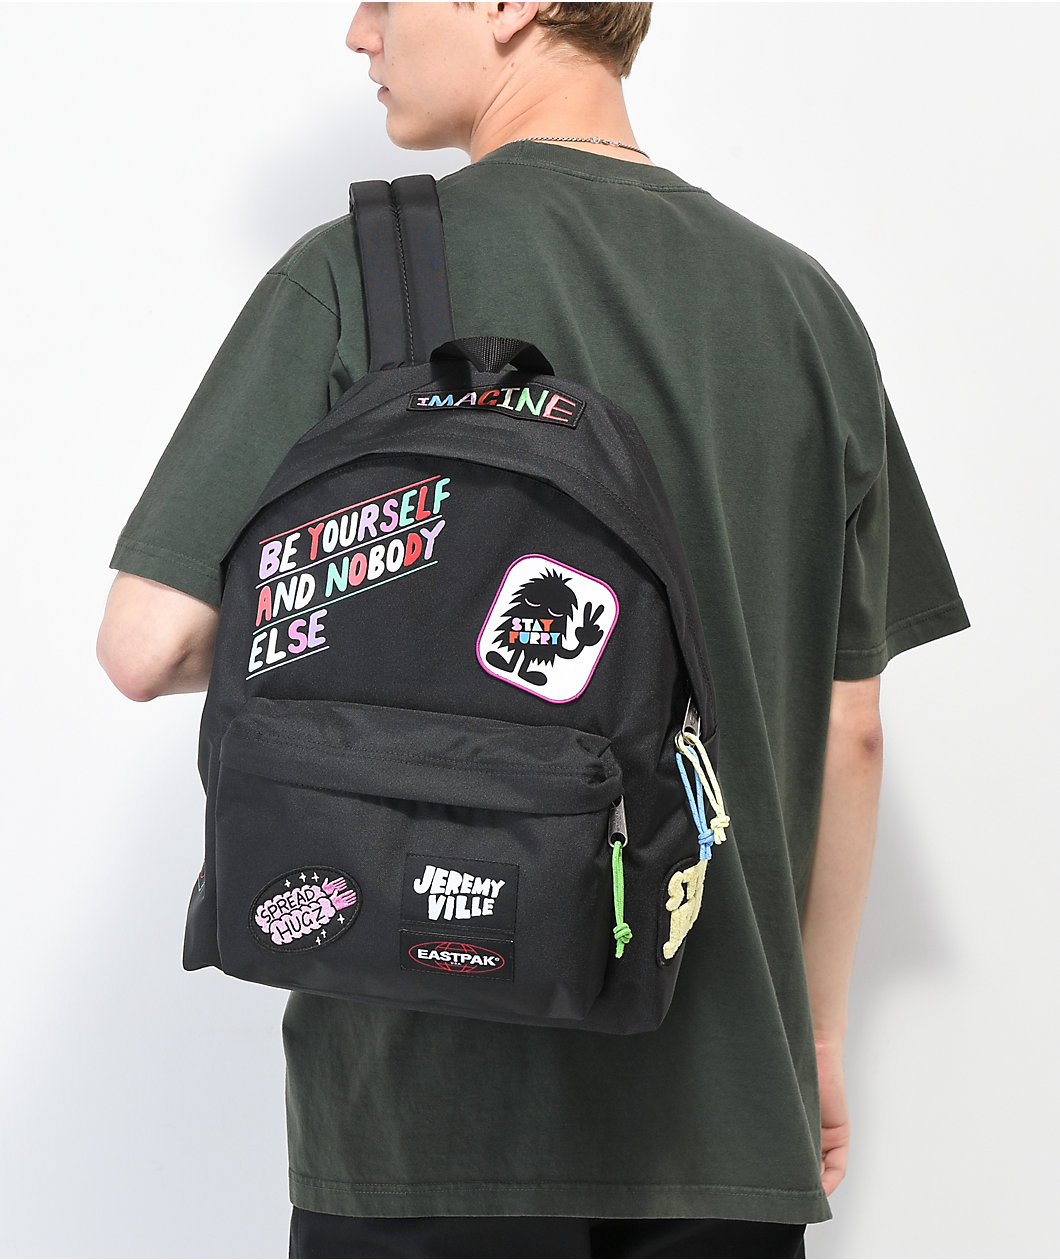 Classical Eastpak x Jeremyville Patched Black Padded Pak'r Backpack sales hot | Shipping in 24h outletussports.com